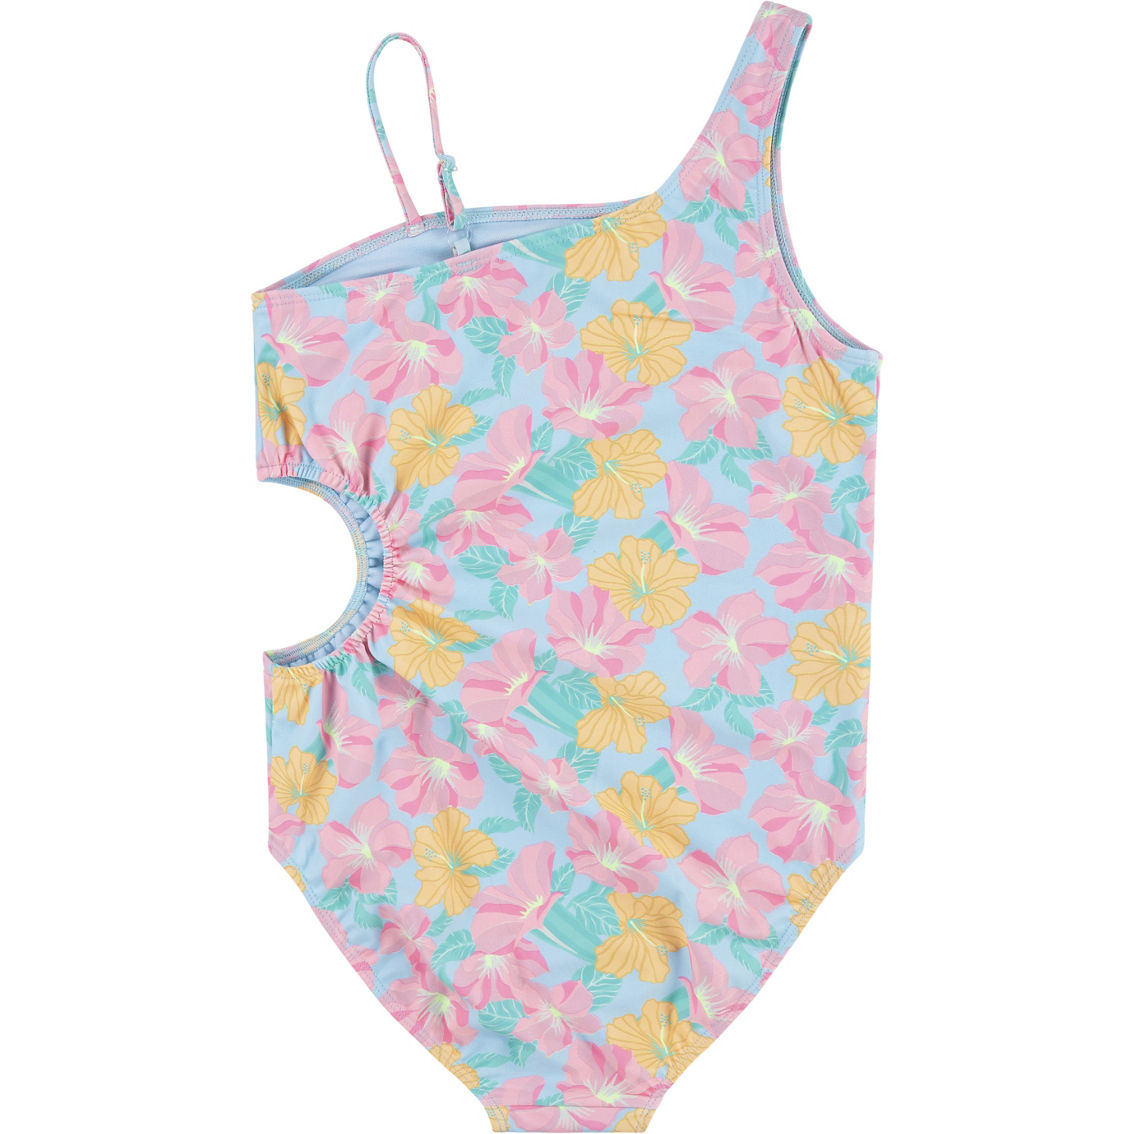 Hurley Girls Cut Out Swimsuit - Image 2 of 4